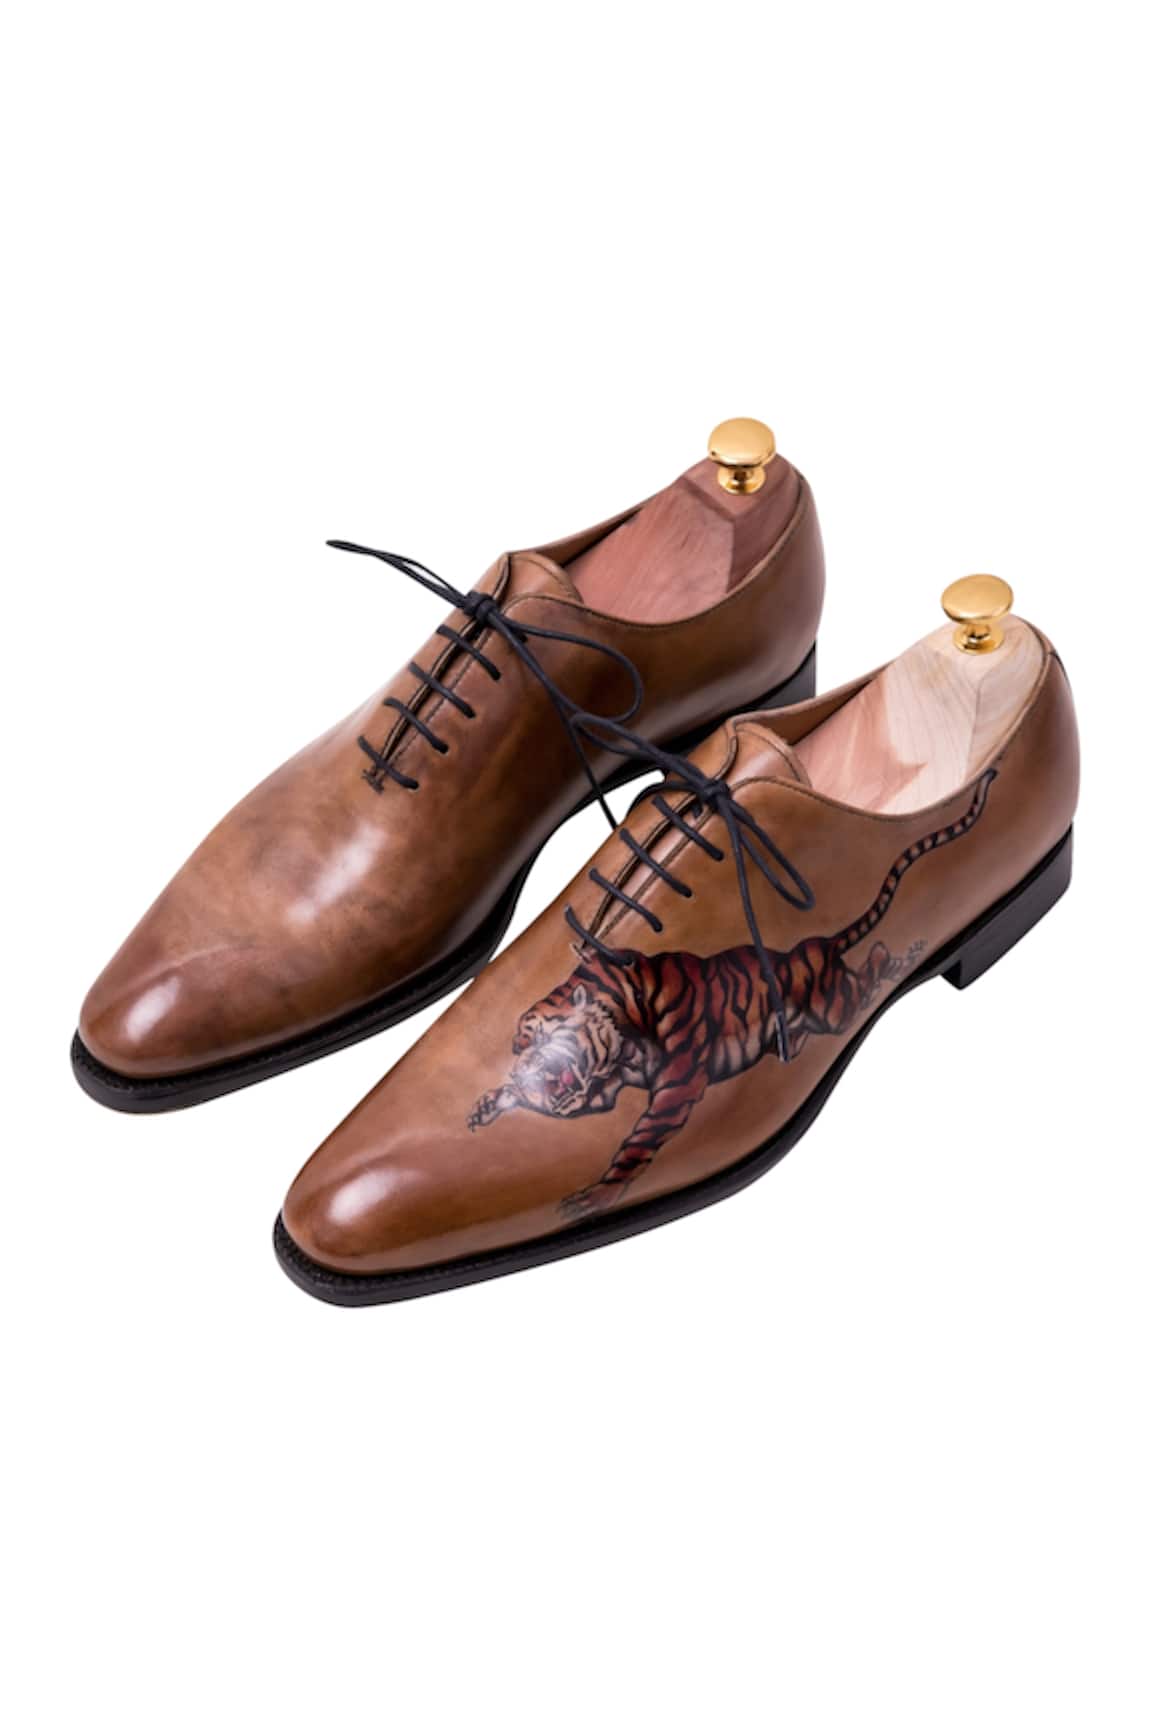 Toramally - Men Painted Oxford Shoes